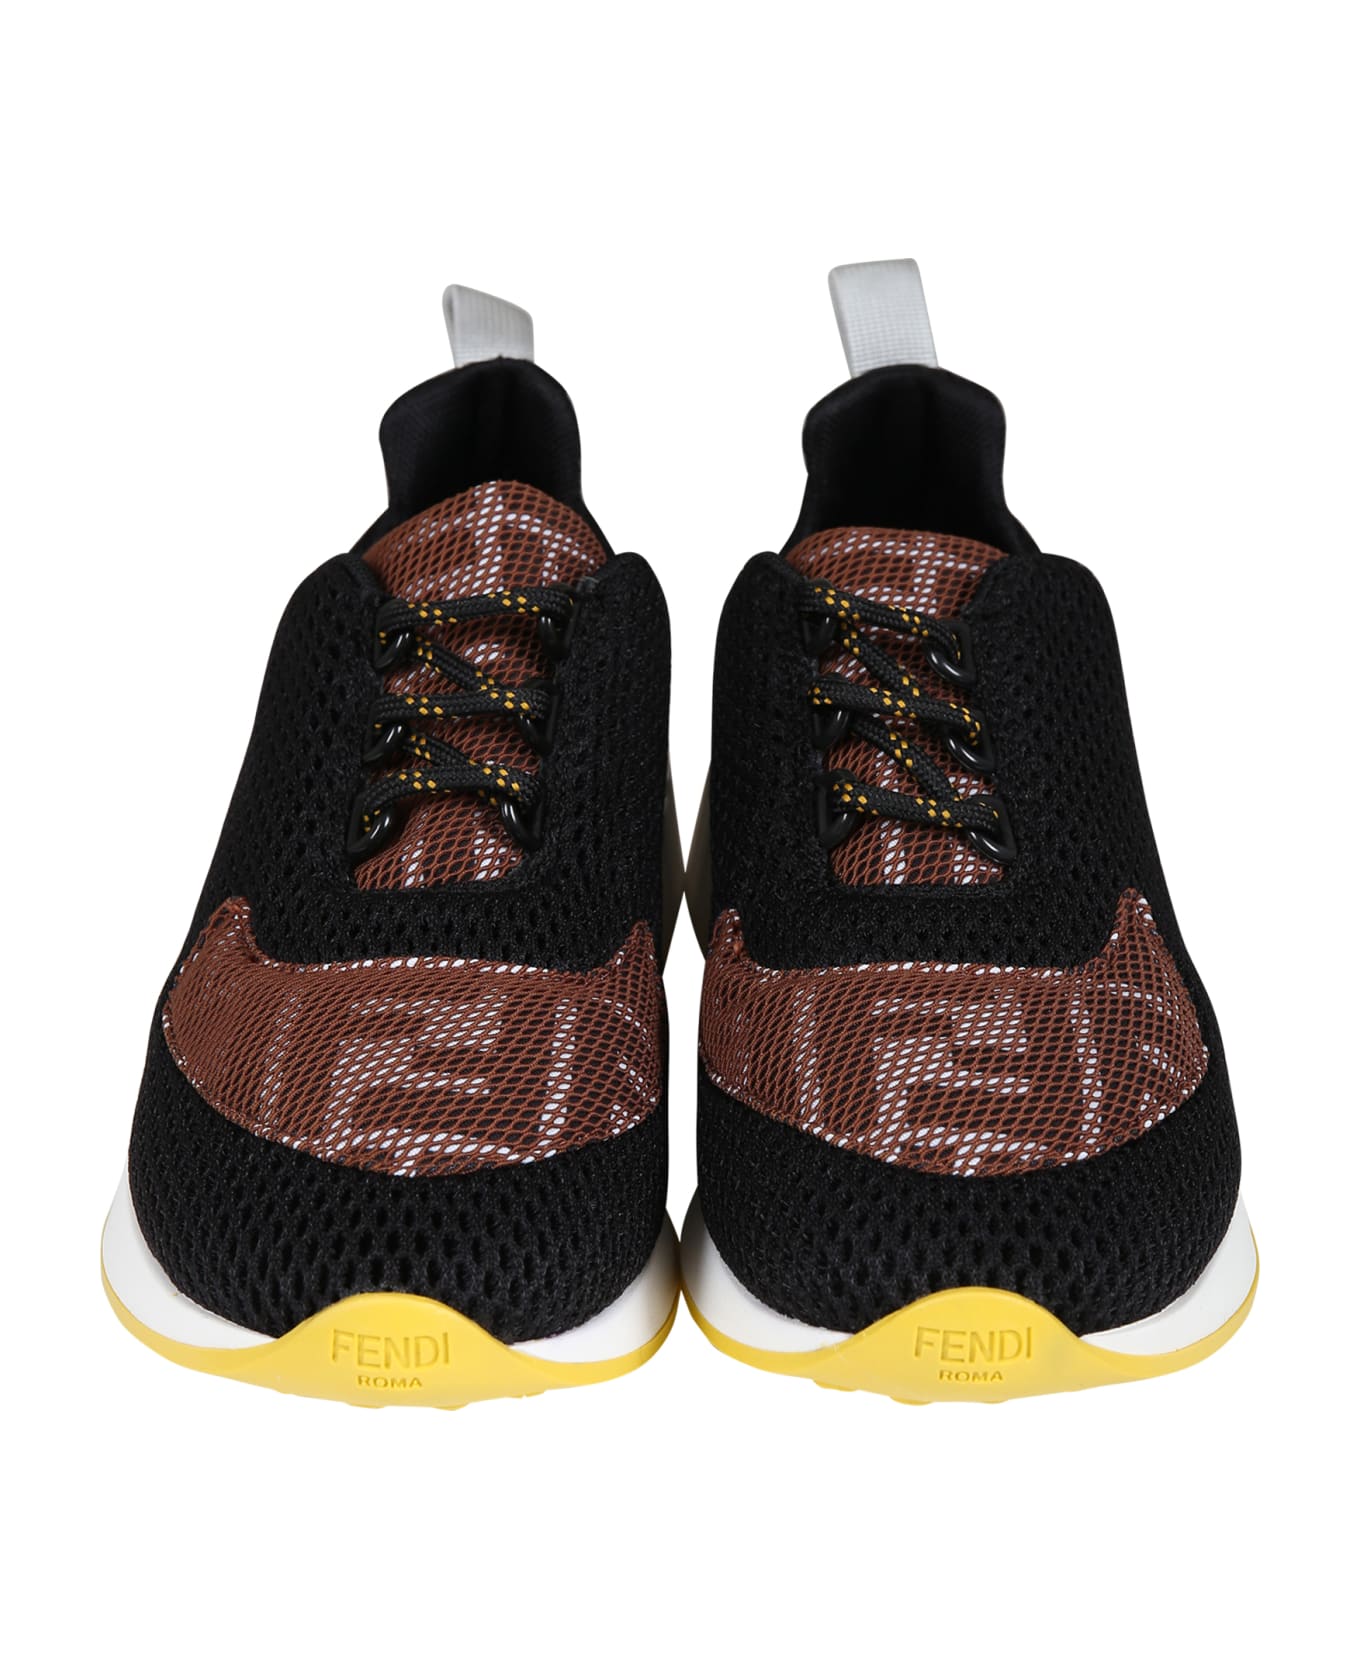 Fendi Black Sneakers For Kids With Iconic Double F - H Nero Bianco